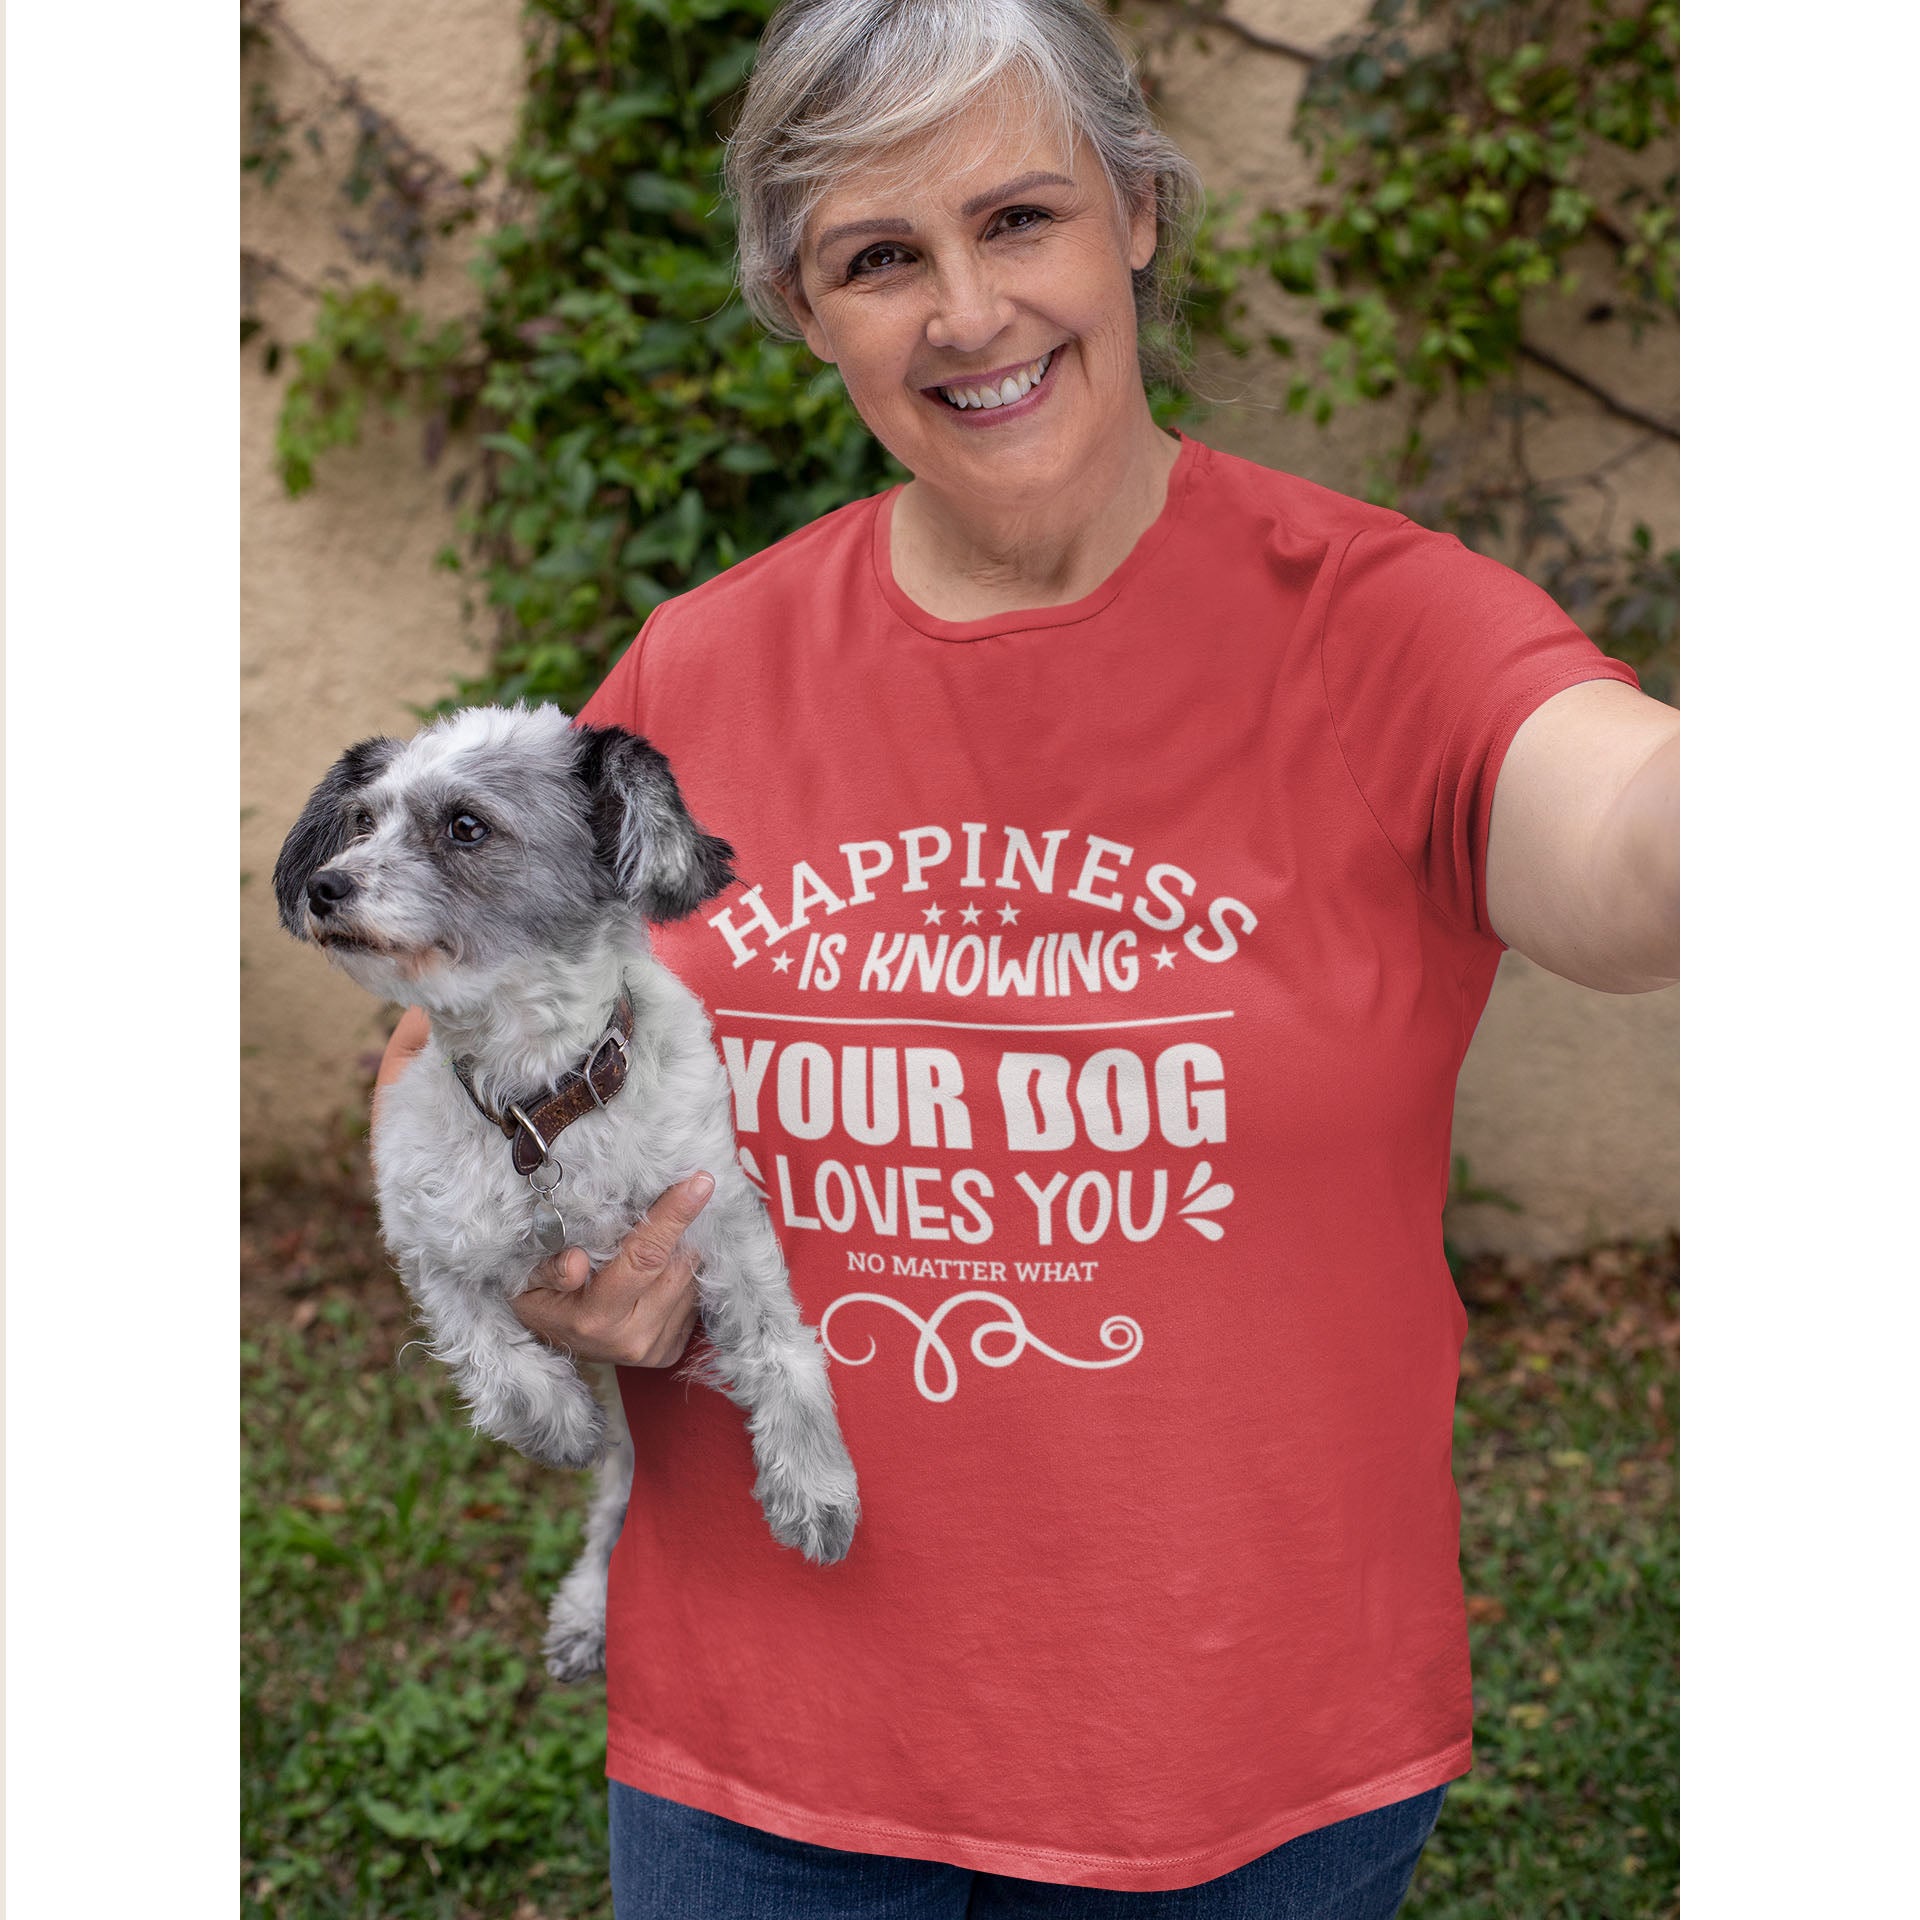 A woman wearing a 'Dogs Pure Love' tee holds her dog, against a background of vines and grass.